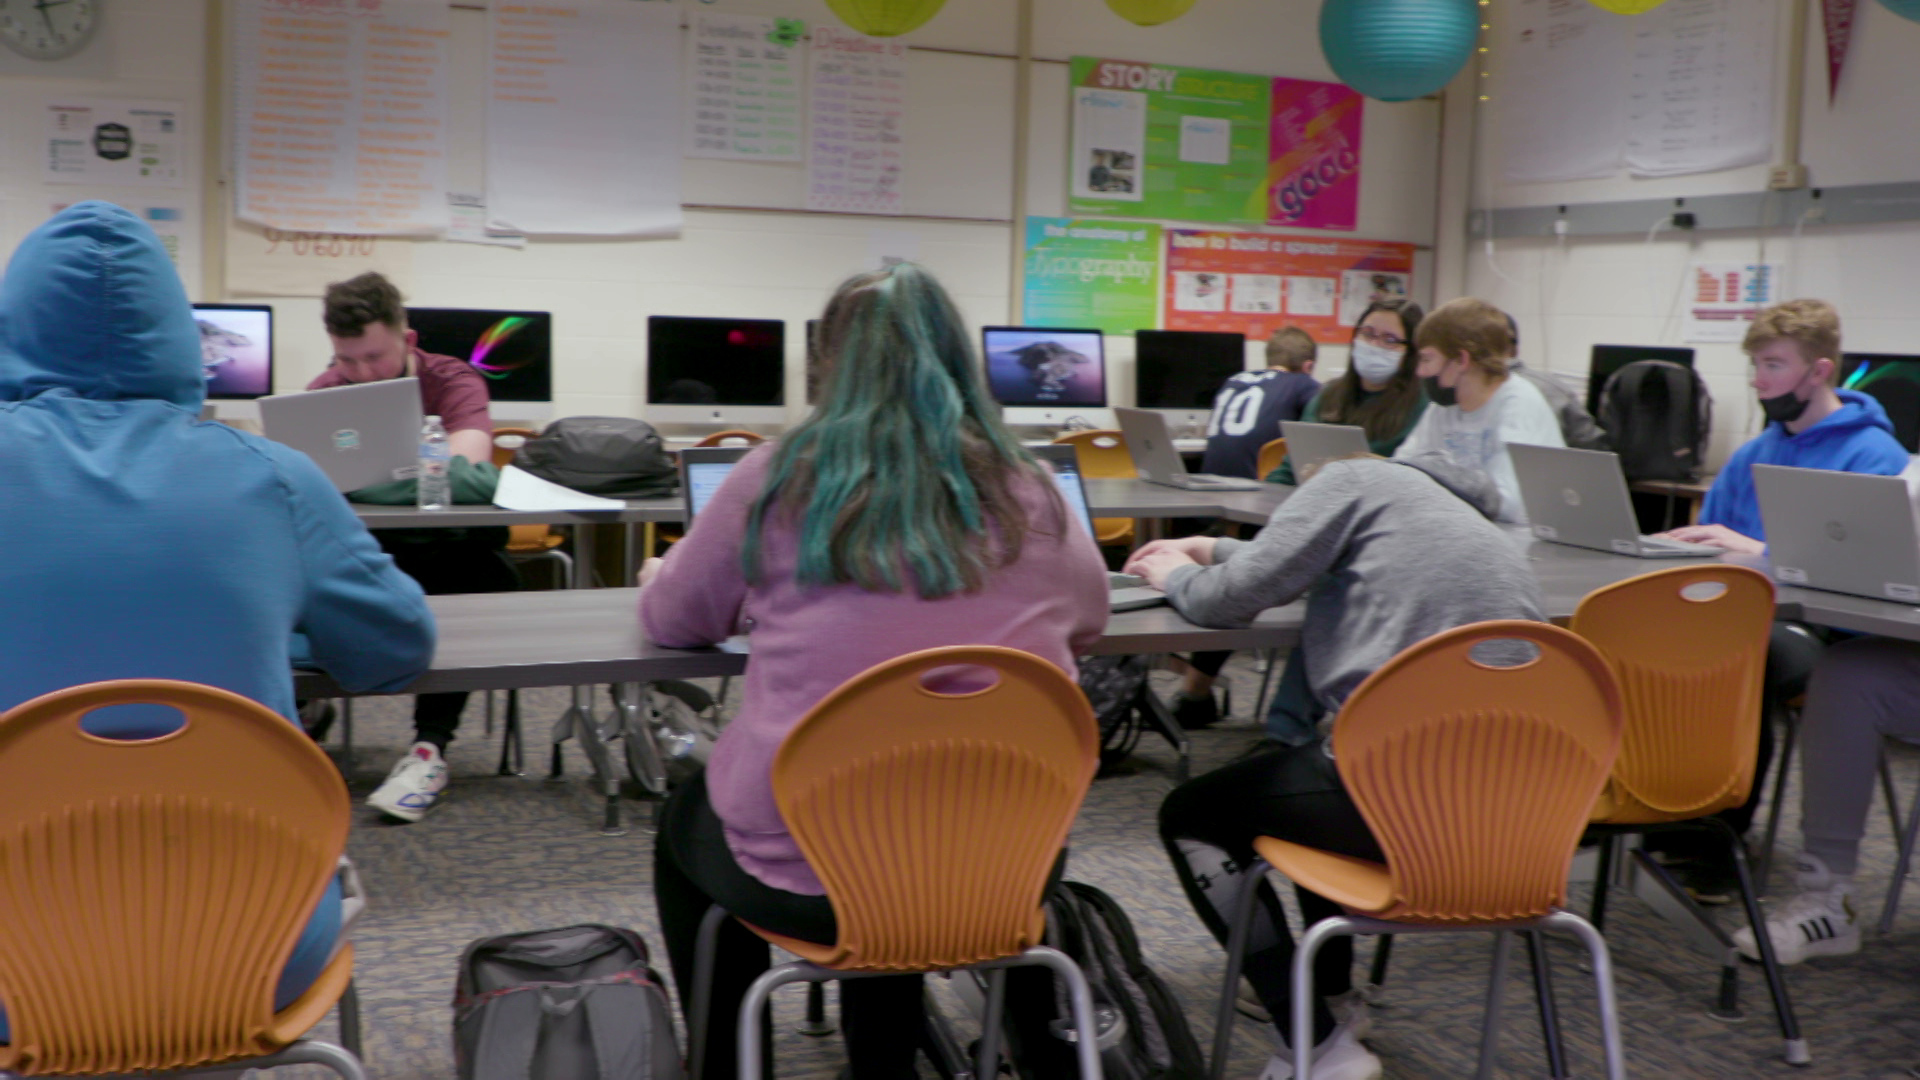 Students work on laptops while seated in chairs facing tables in a classroom.